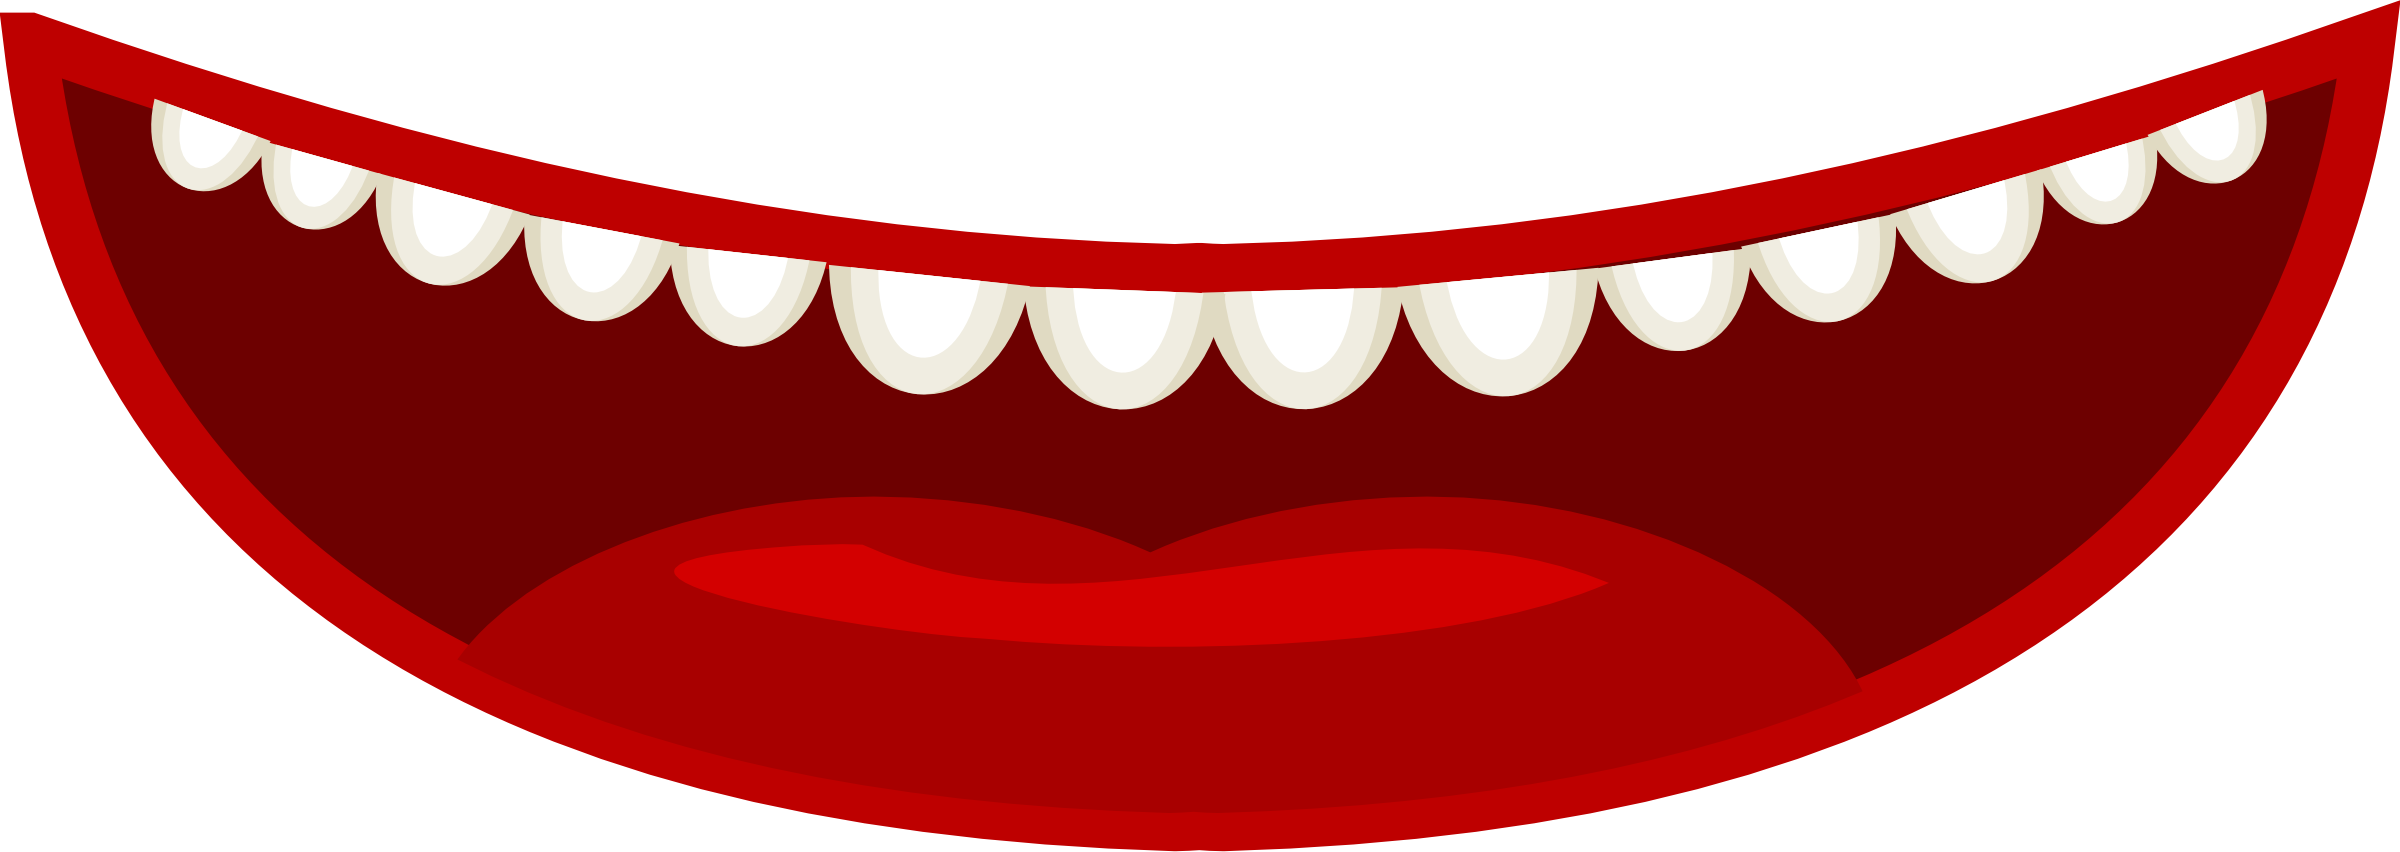 Tooth clear background